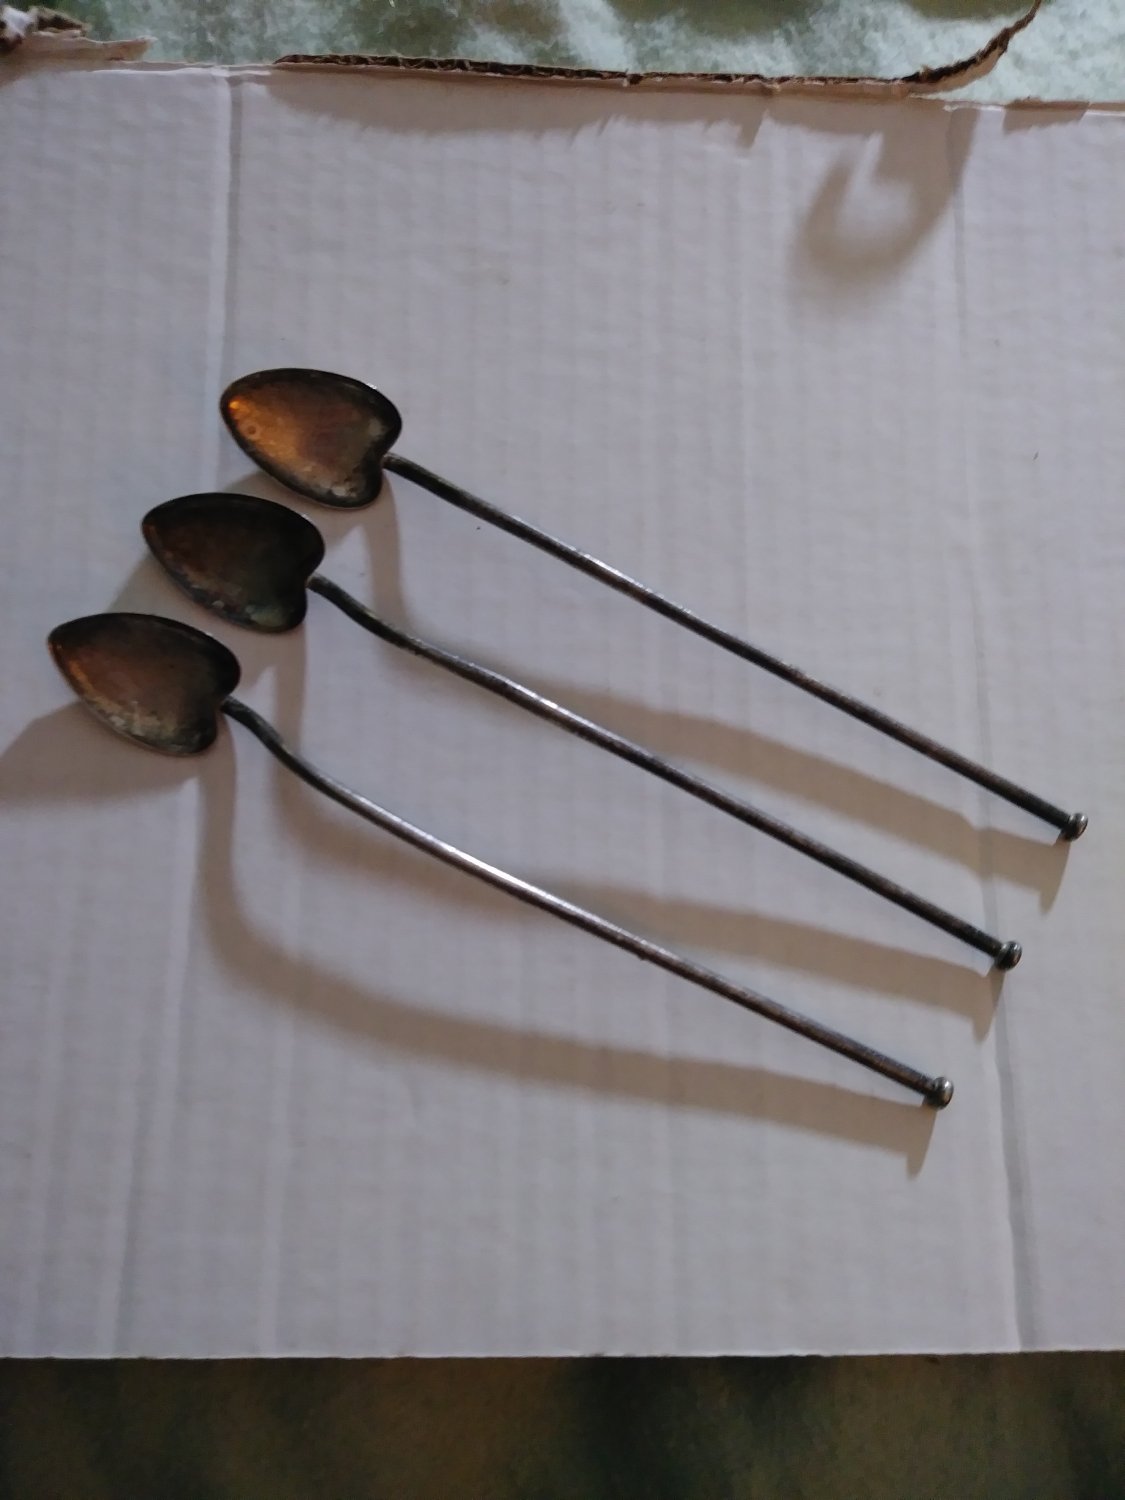 Antique Sterling Lot 3 Julep sipping Spoons Webster Hallmark